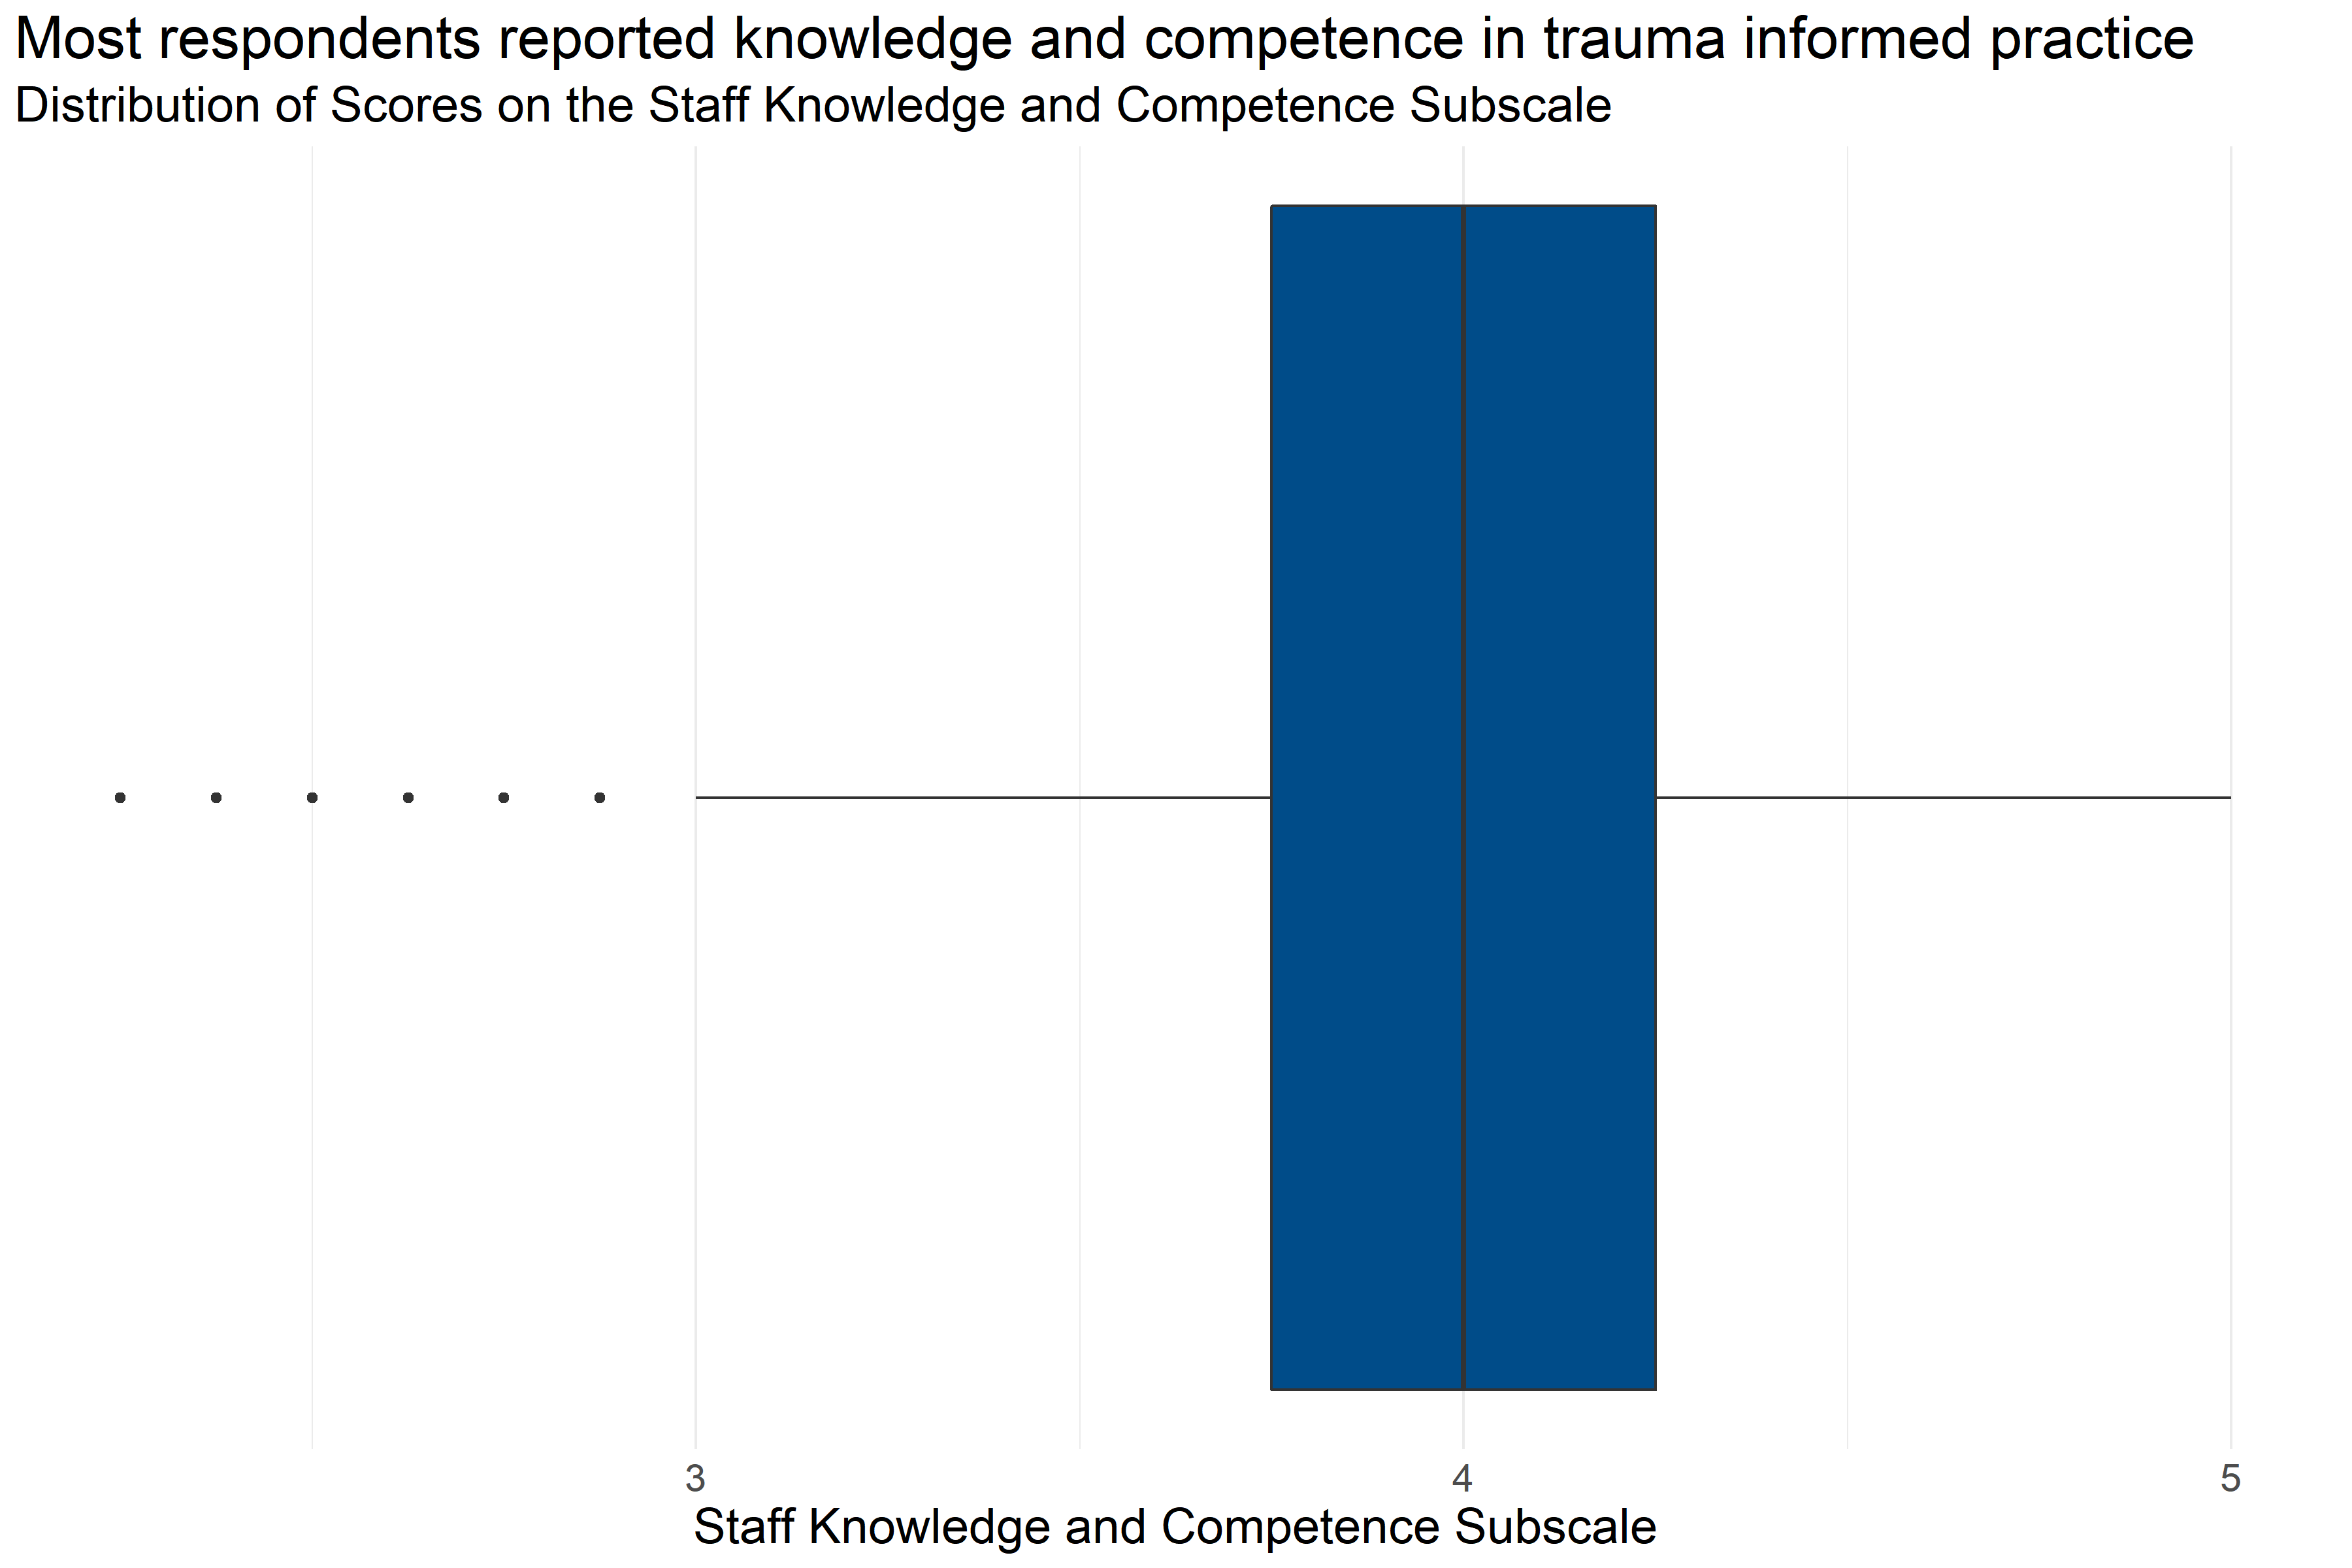 Boxplot of score distributions for Staff Knowledge and Competence
Subscale